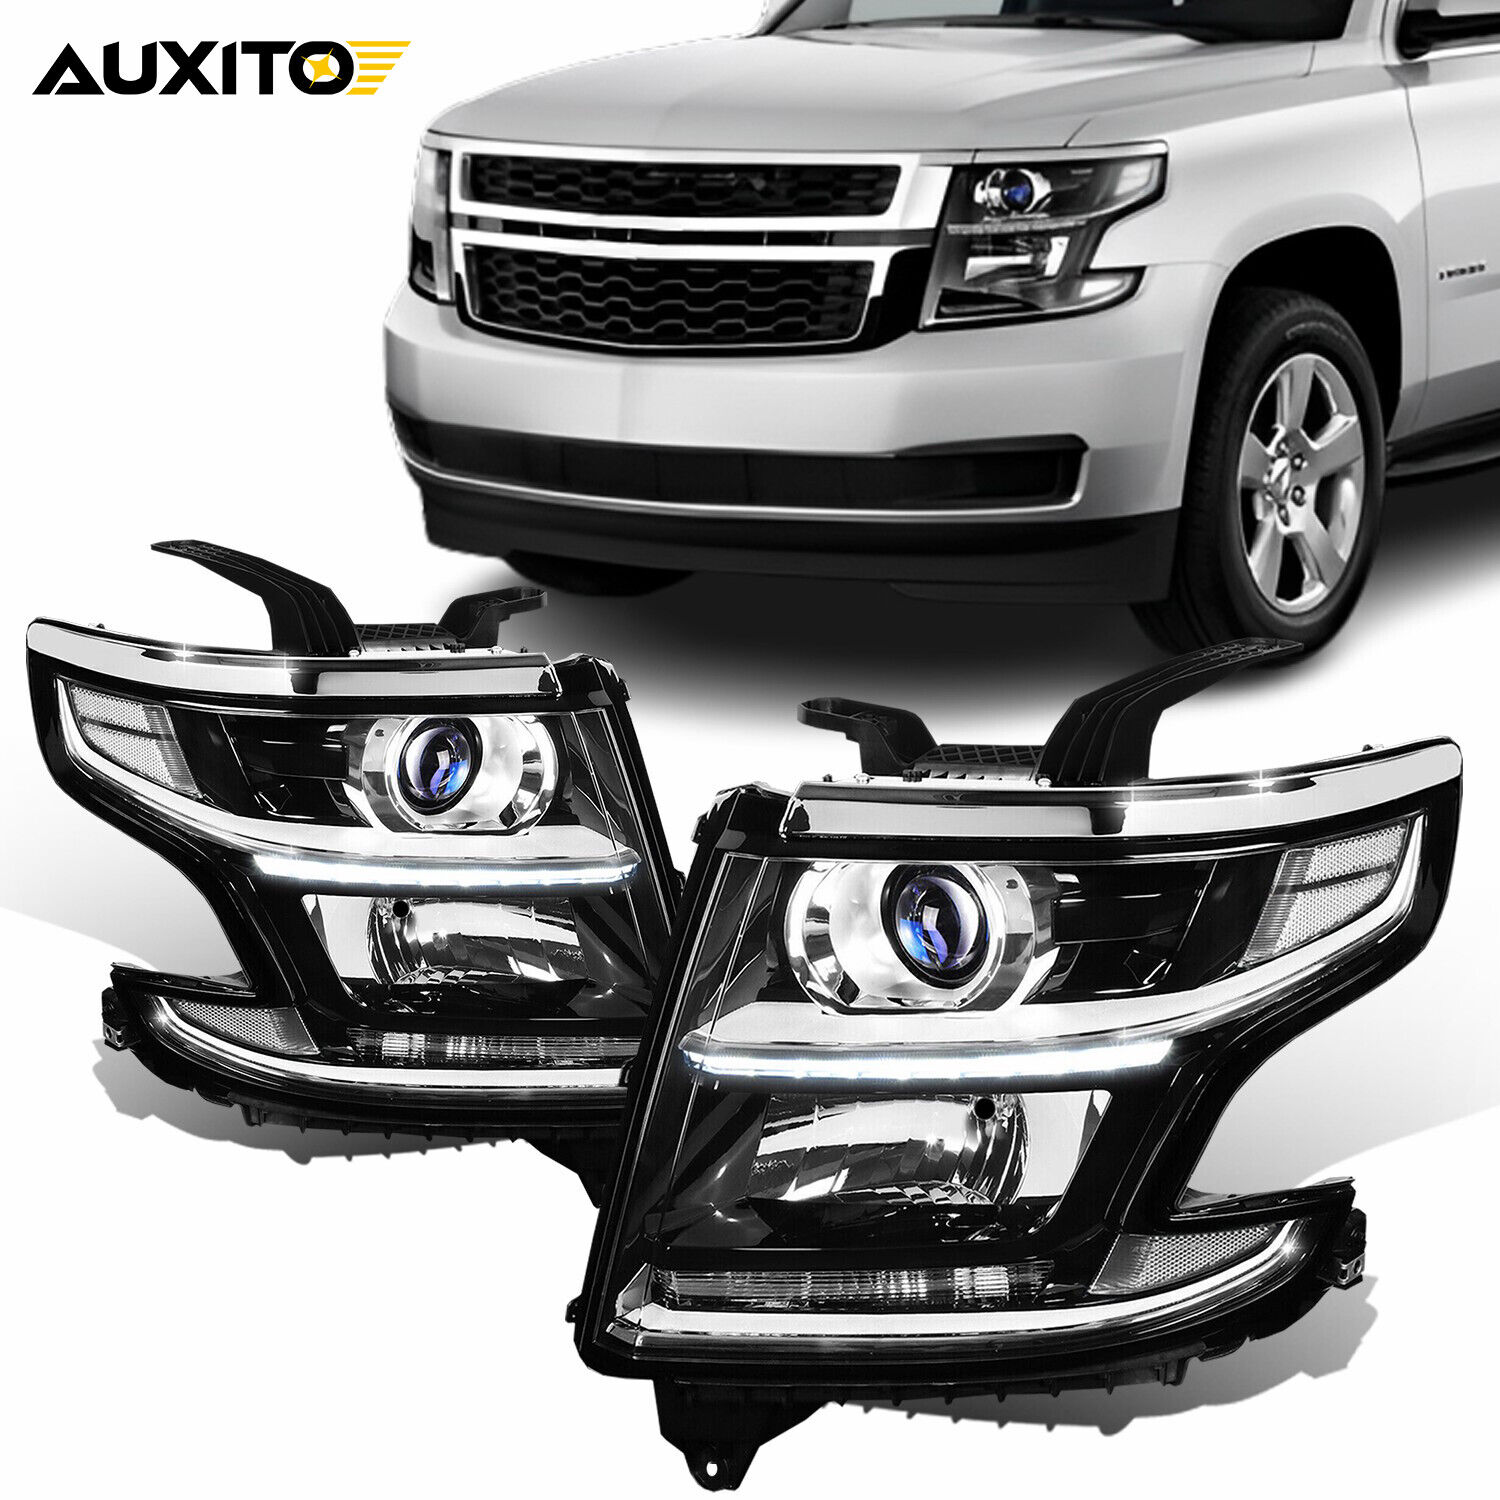 FOR 2015-20 CHEVY TAHOE SUBURBAN LEFT RIGHT DRL PROJECTOR HEADLIGHT GM2503405 EA